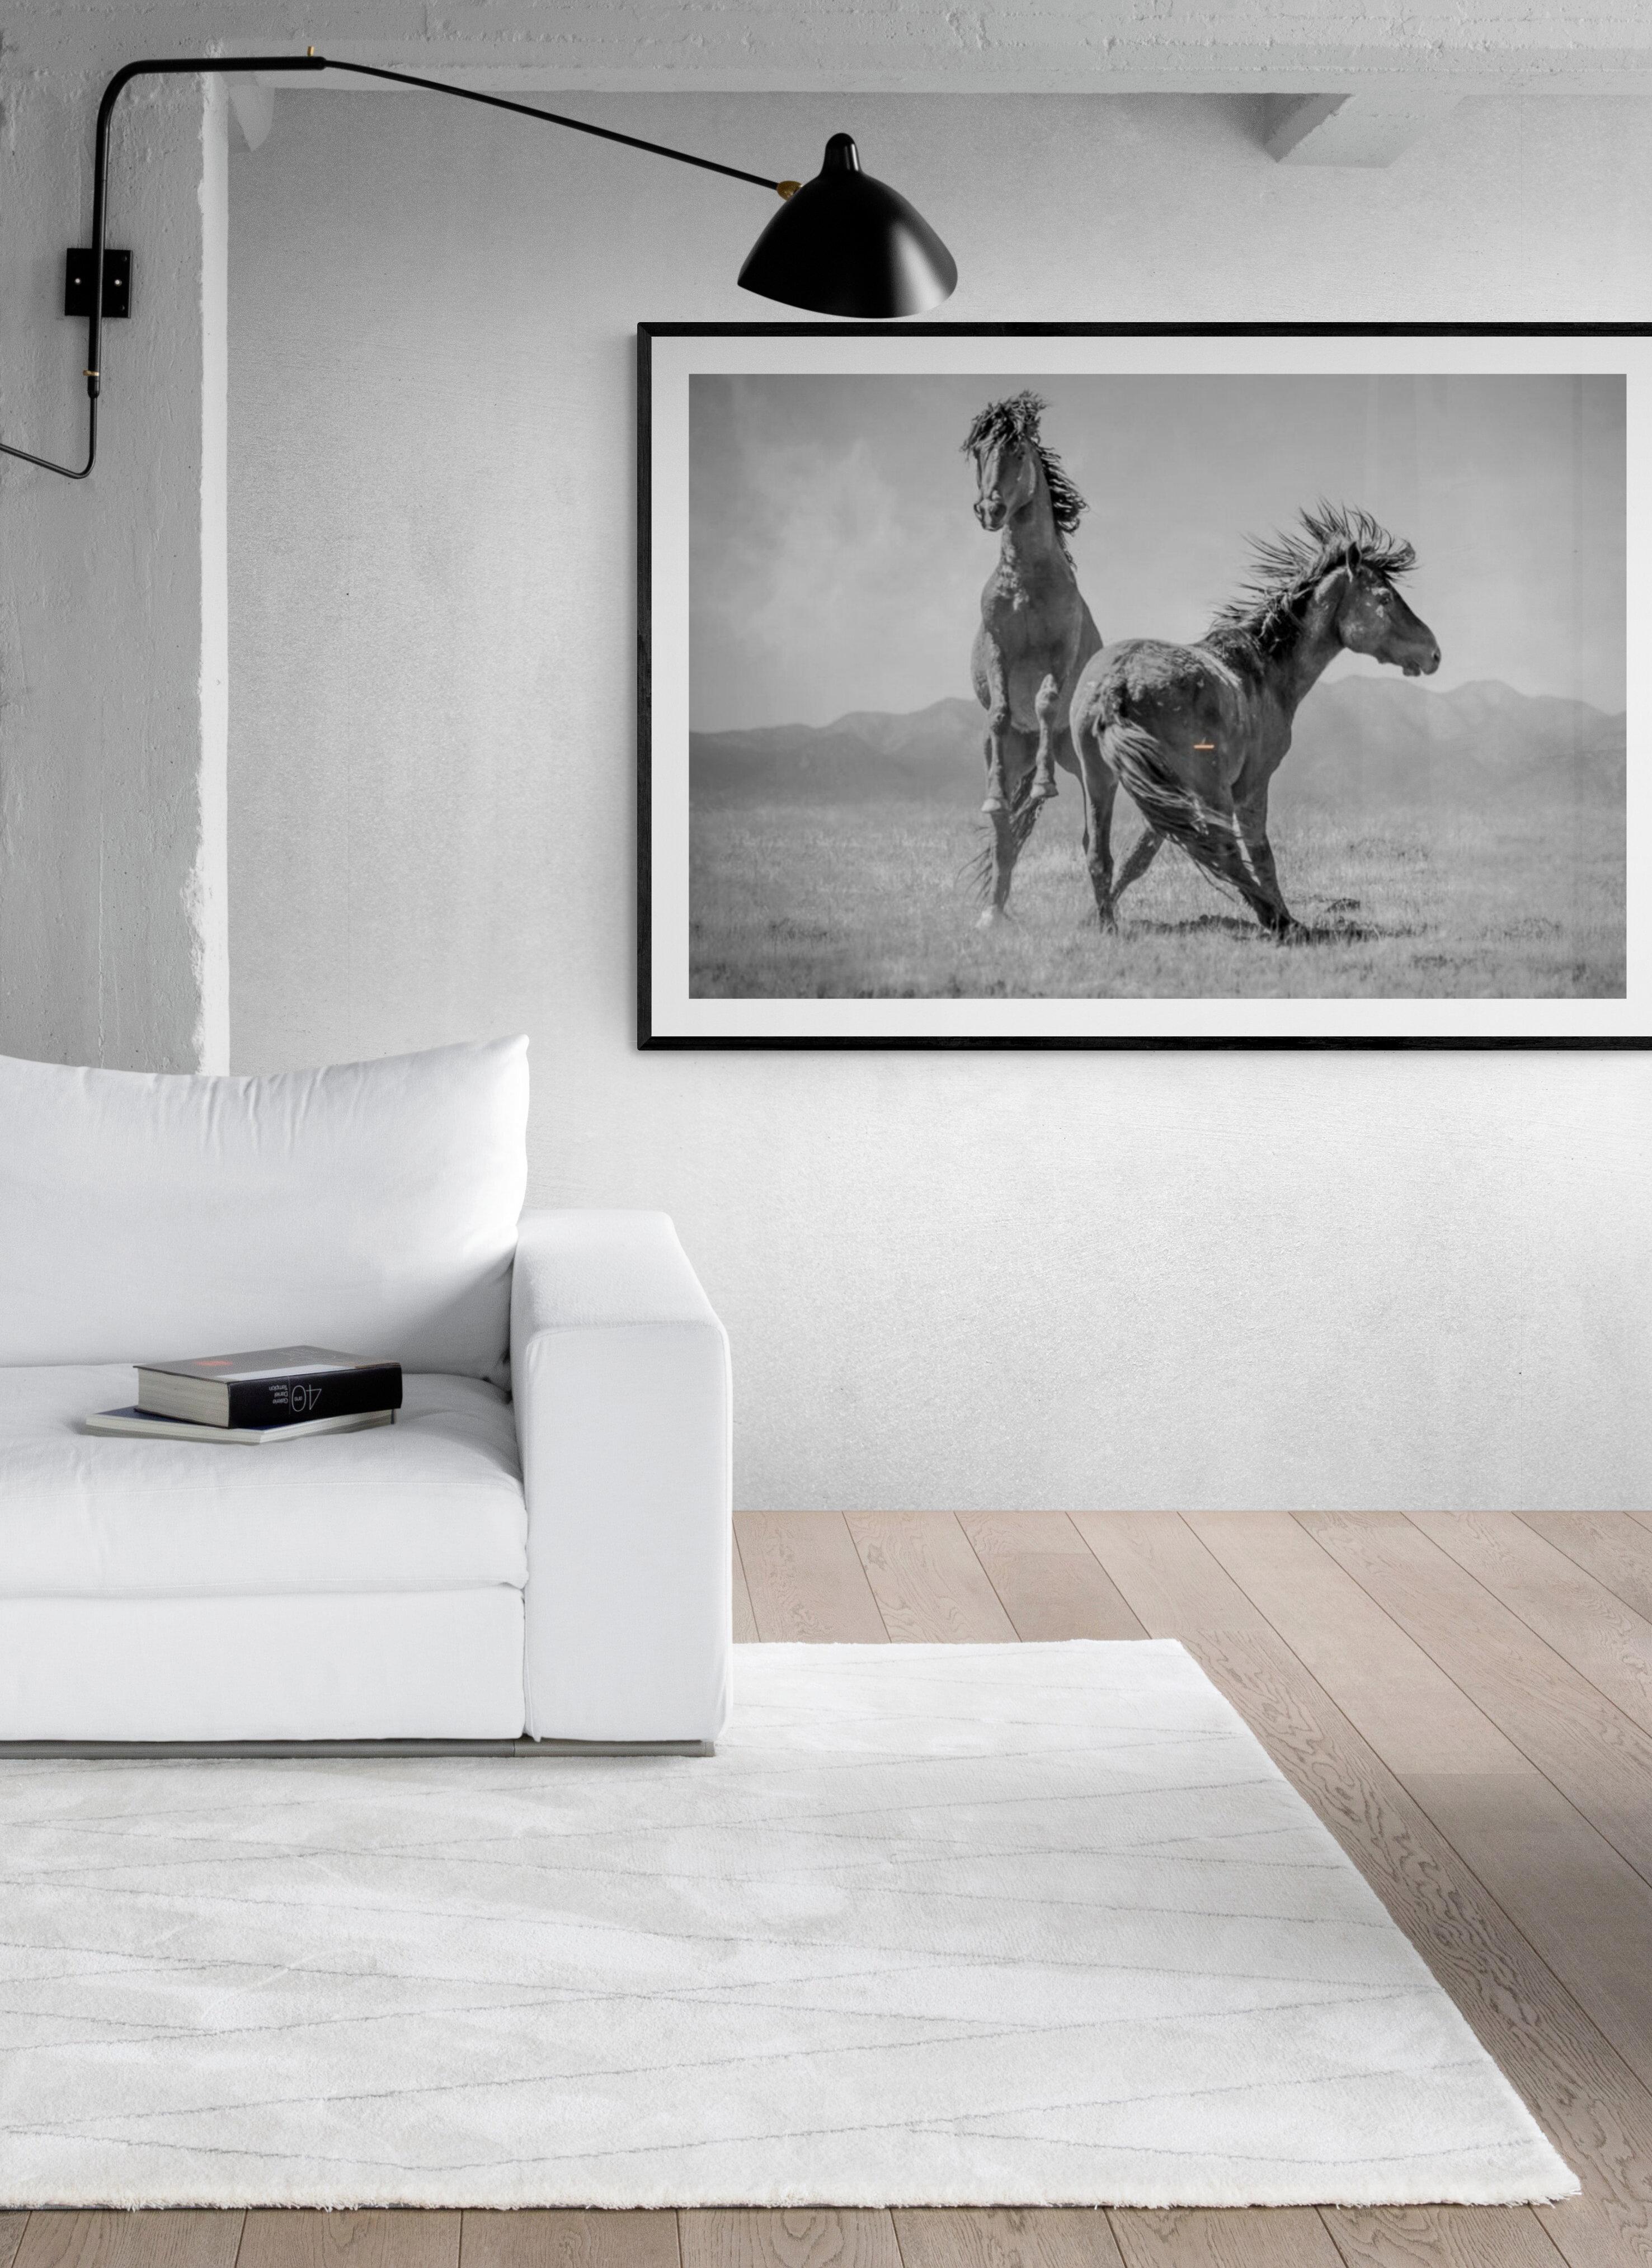 This is a contemporary photograph of American Wild Mustangs. 
40x50 
Printed on archival paper and using archival inks
Framing available. Inquire for rates. 

Shane Russeck has built a reputation for capturing America's landscapes, cultures and